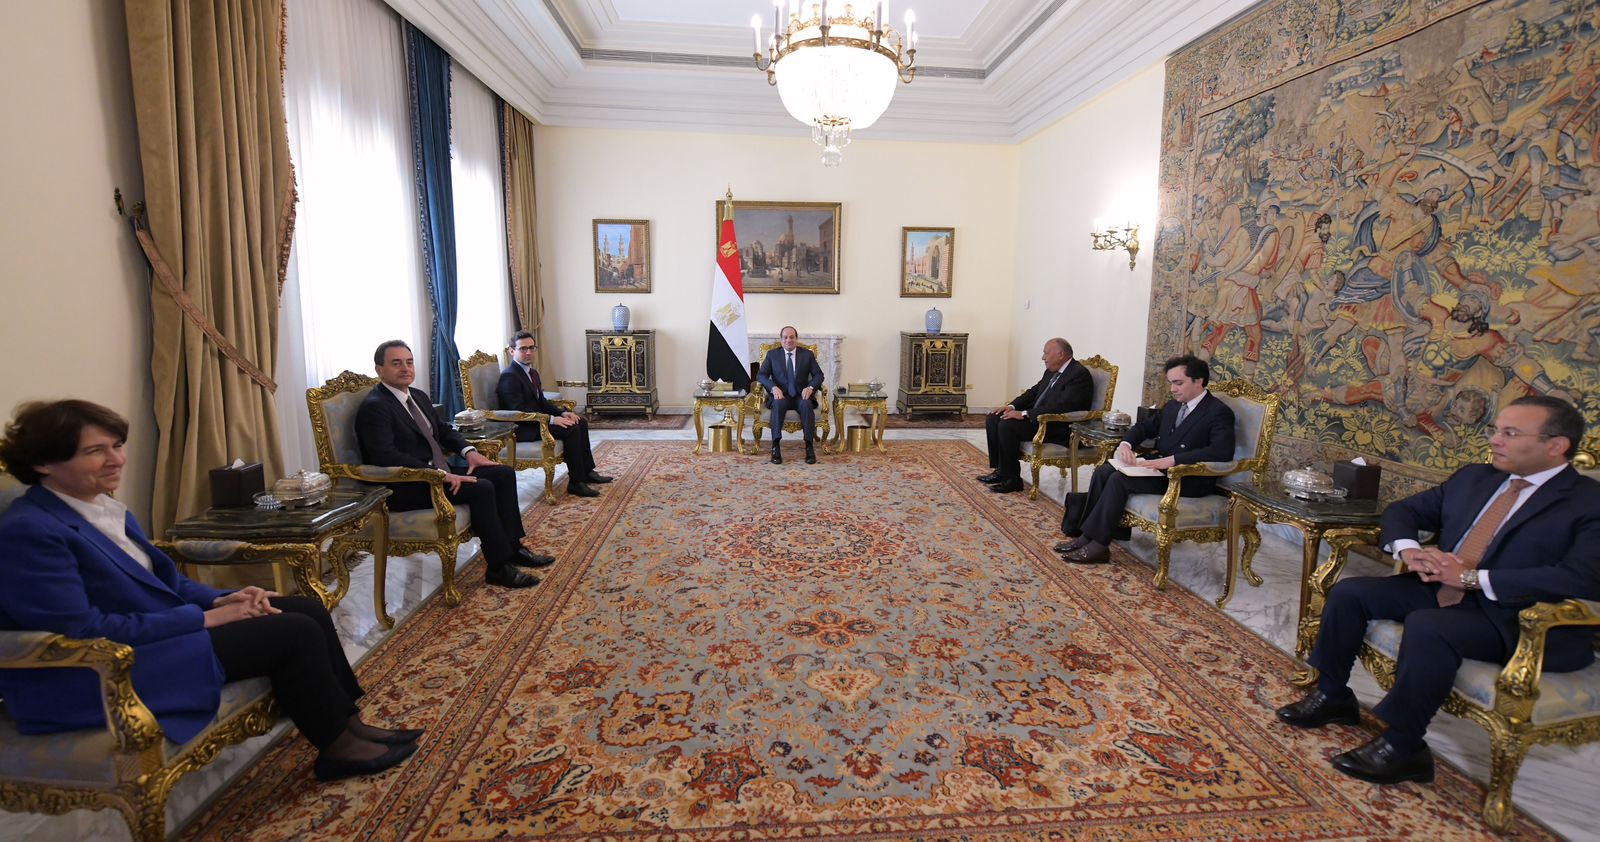 President Sisi and the French Foreign Minister affirm the two countries’ absolute rejection of any measures aimed at displacing Palestinians from their lands.